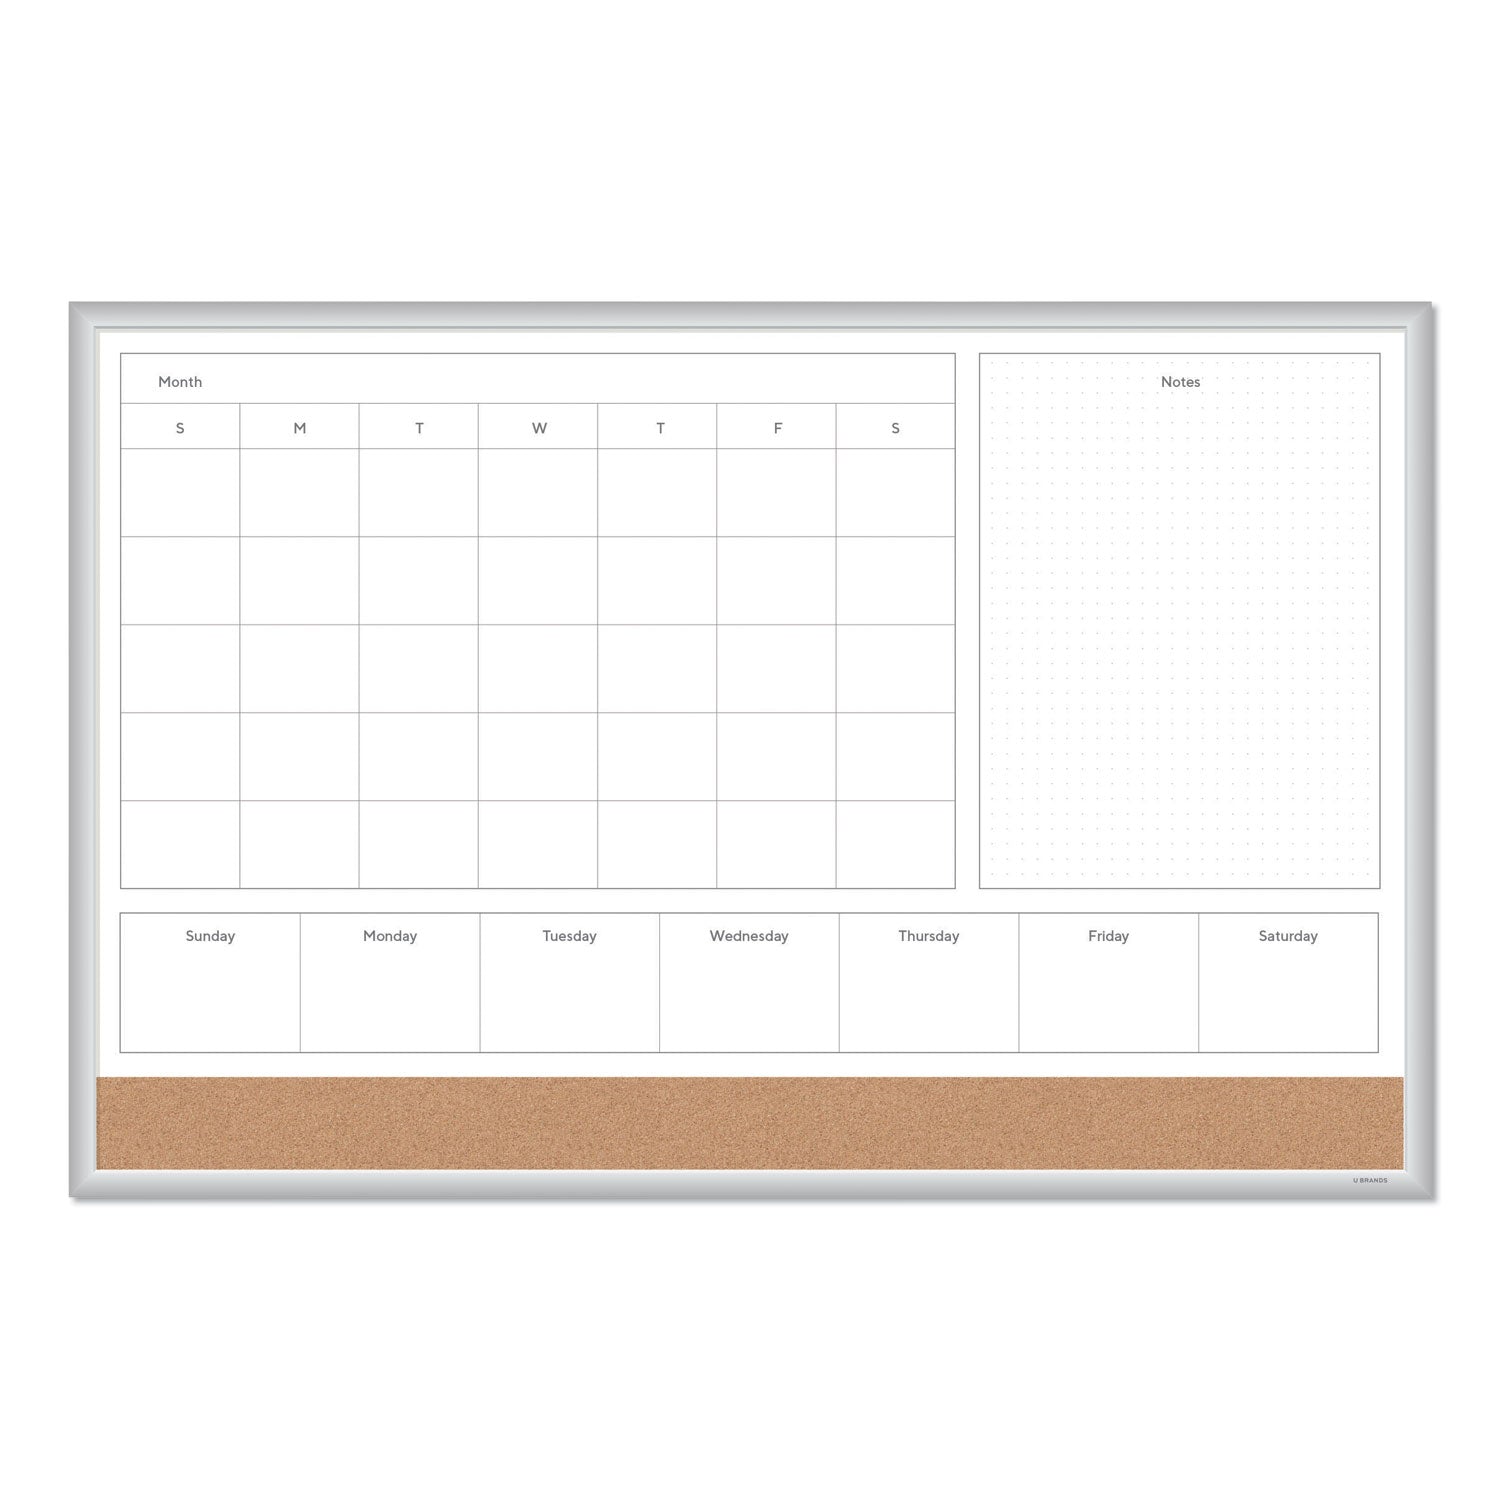 4n1-magnetic-dry-erase-combo-board-35-x-23-tan-white-surface-silver-aluminum-frame_ubr3891u0001 - 1